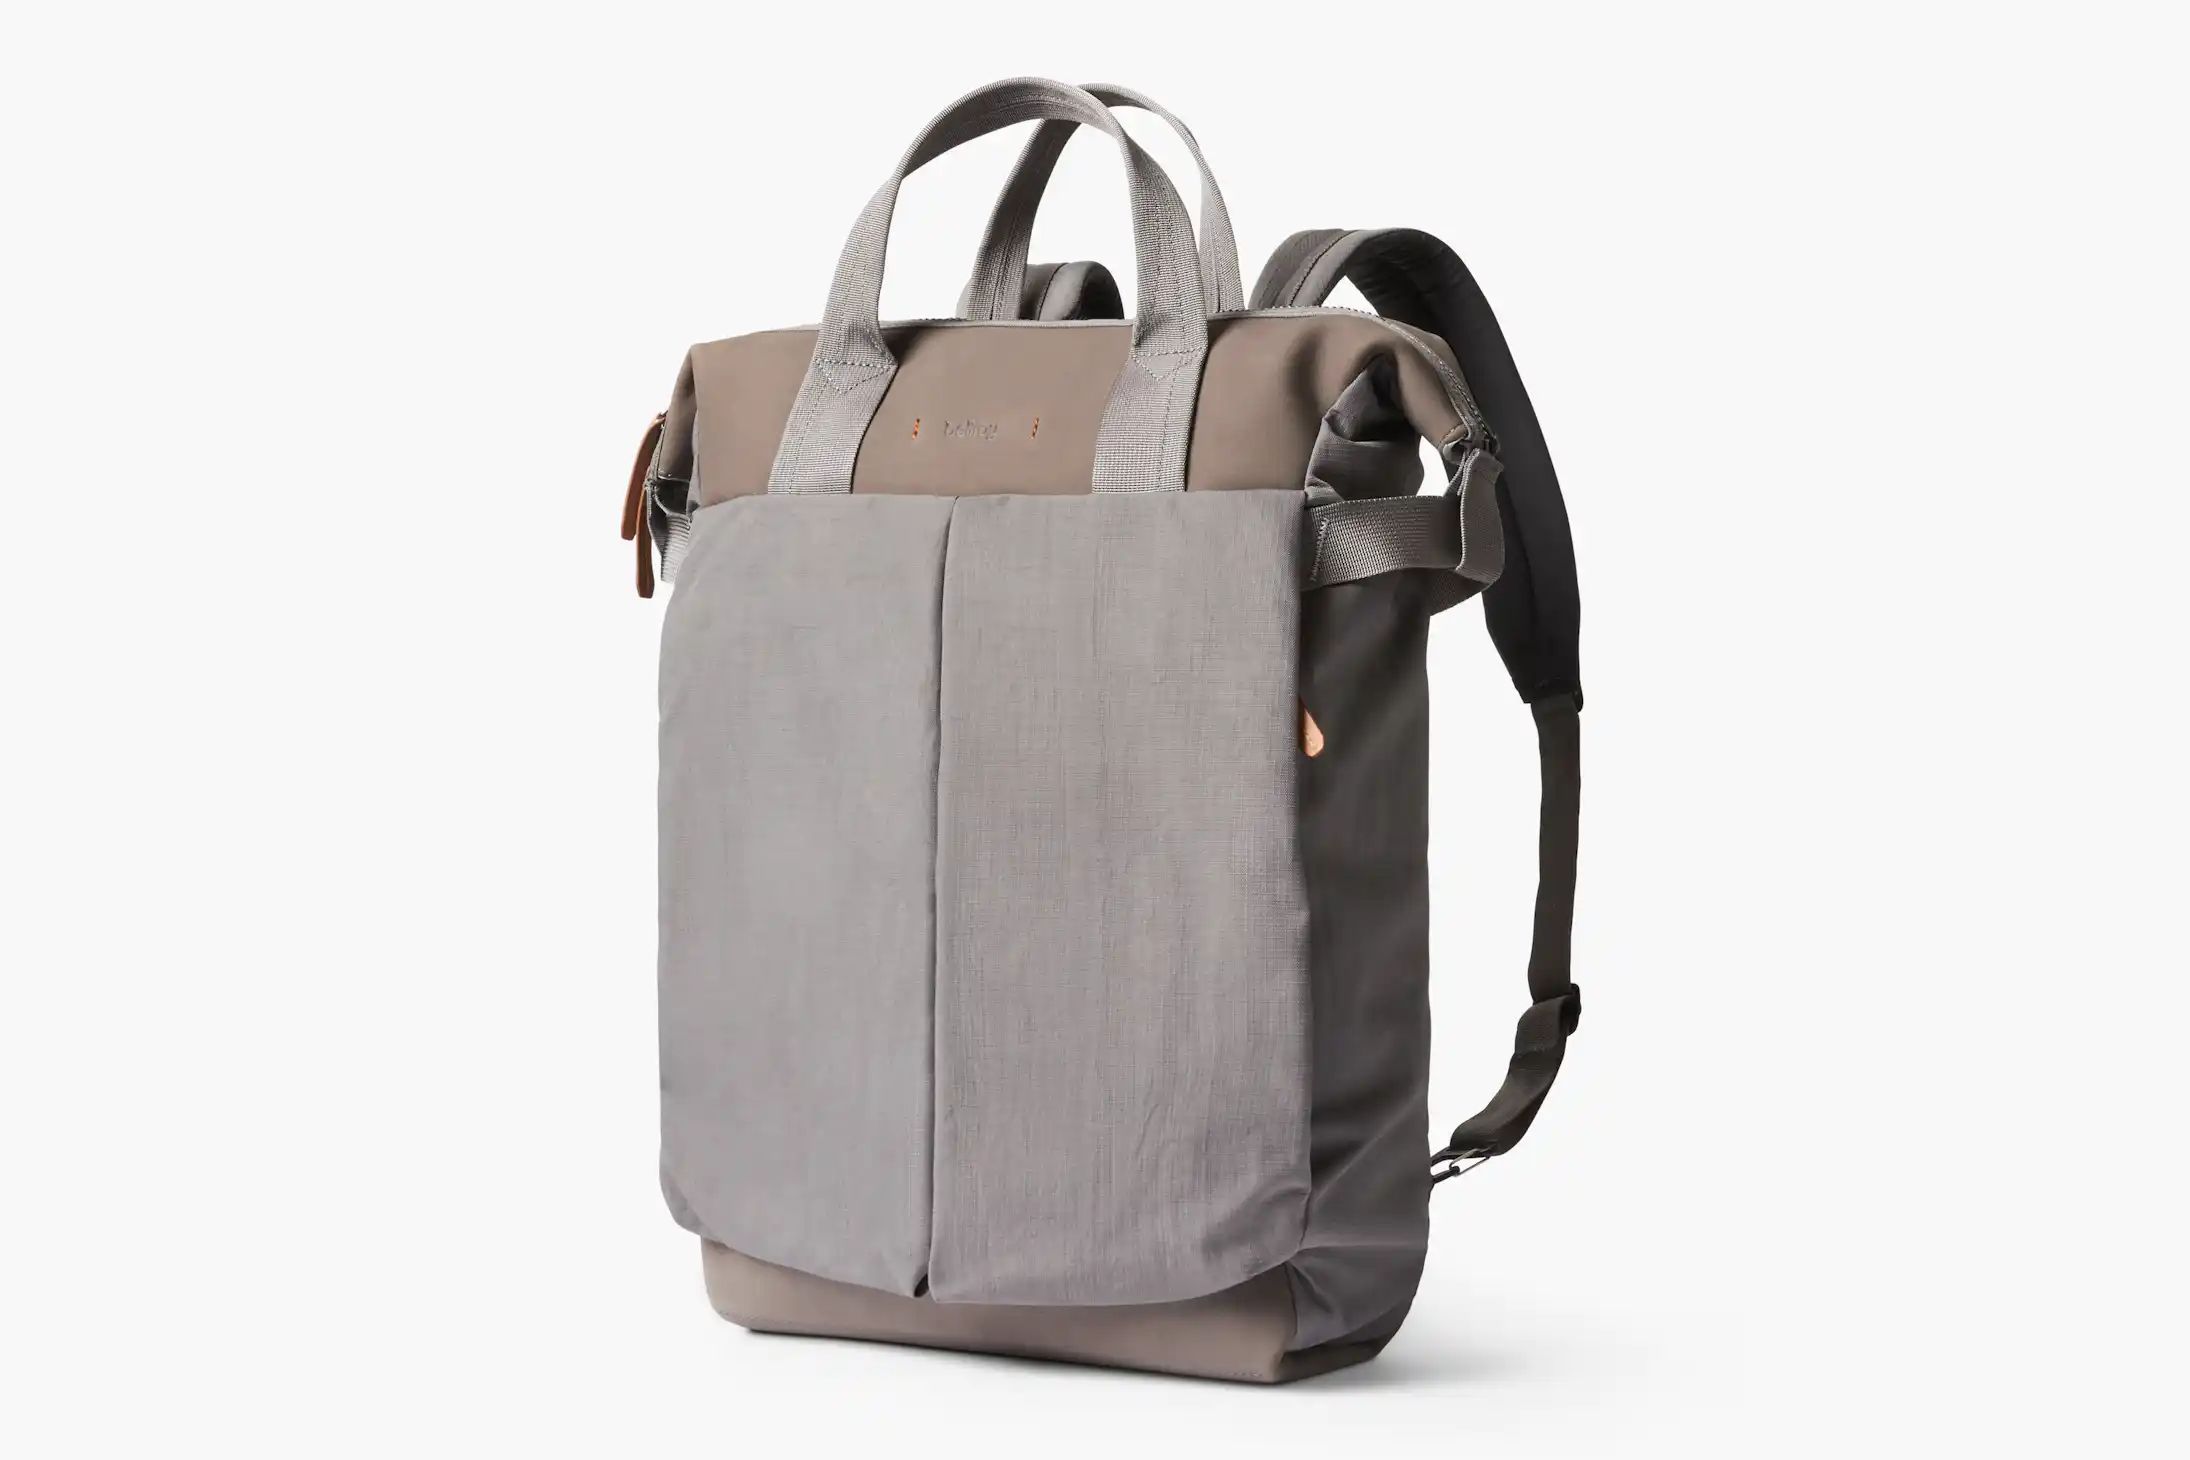 Tokyo Totepack Premium | Convertible leather backpack or tote | Bellroy | Bellroy